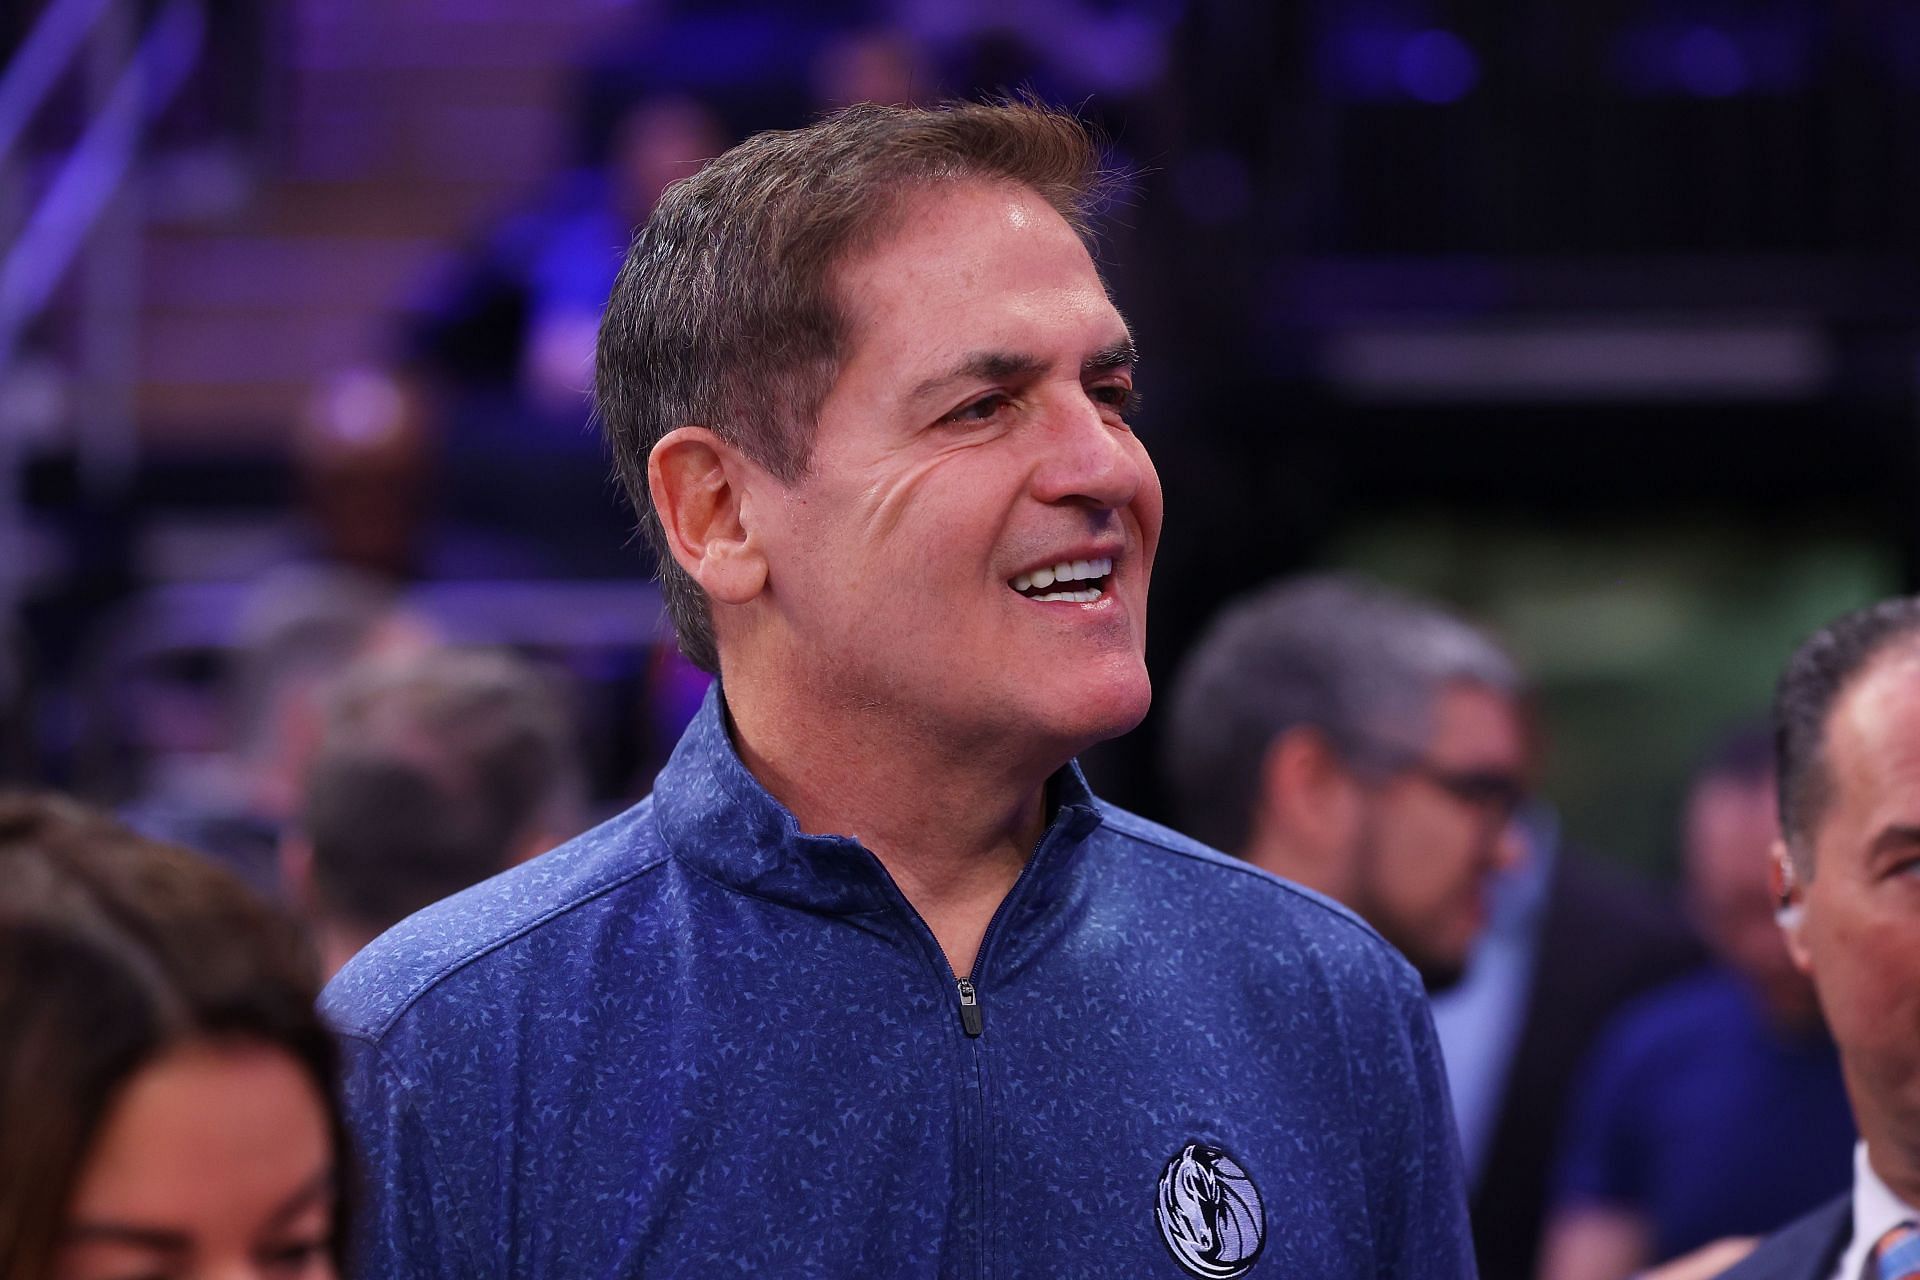 Who Is Mark Cuban's Wife? All About Tiffany Stewart